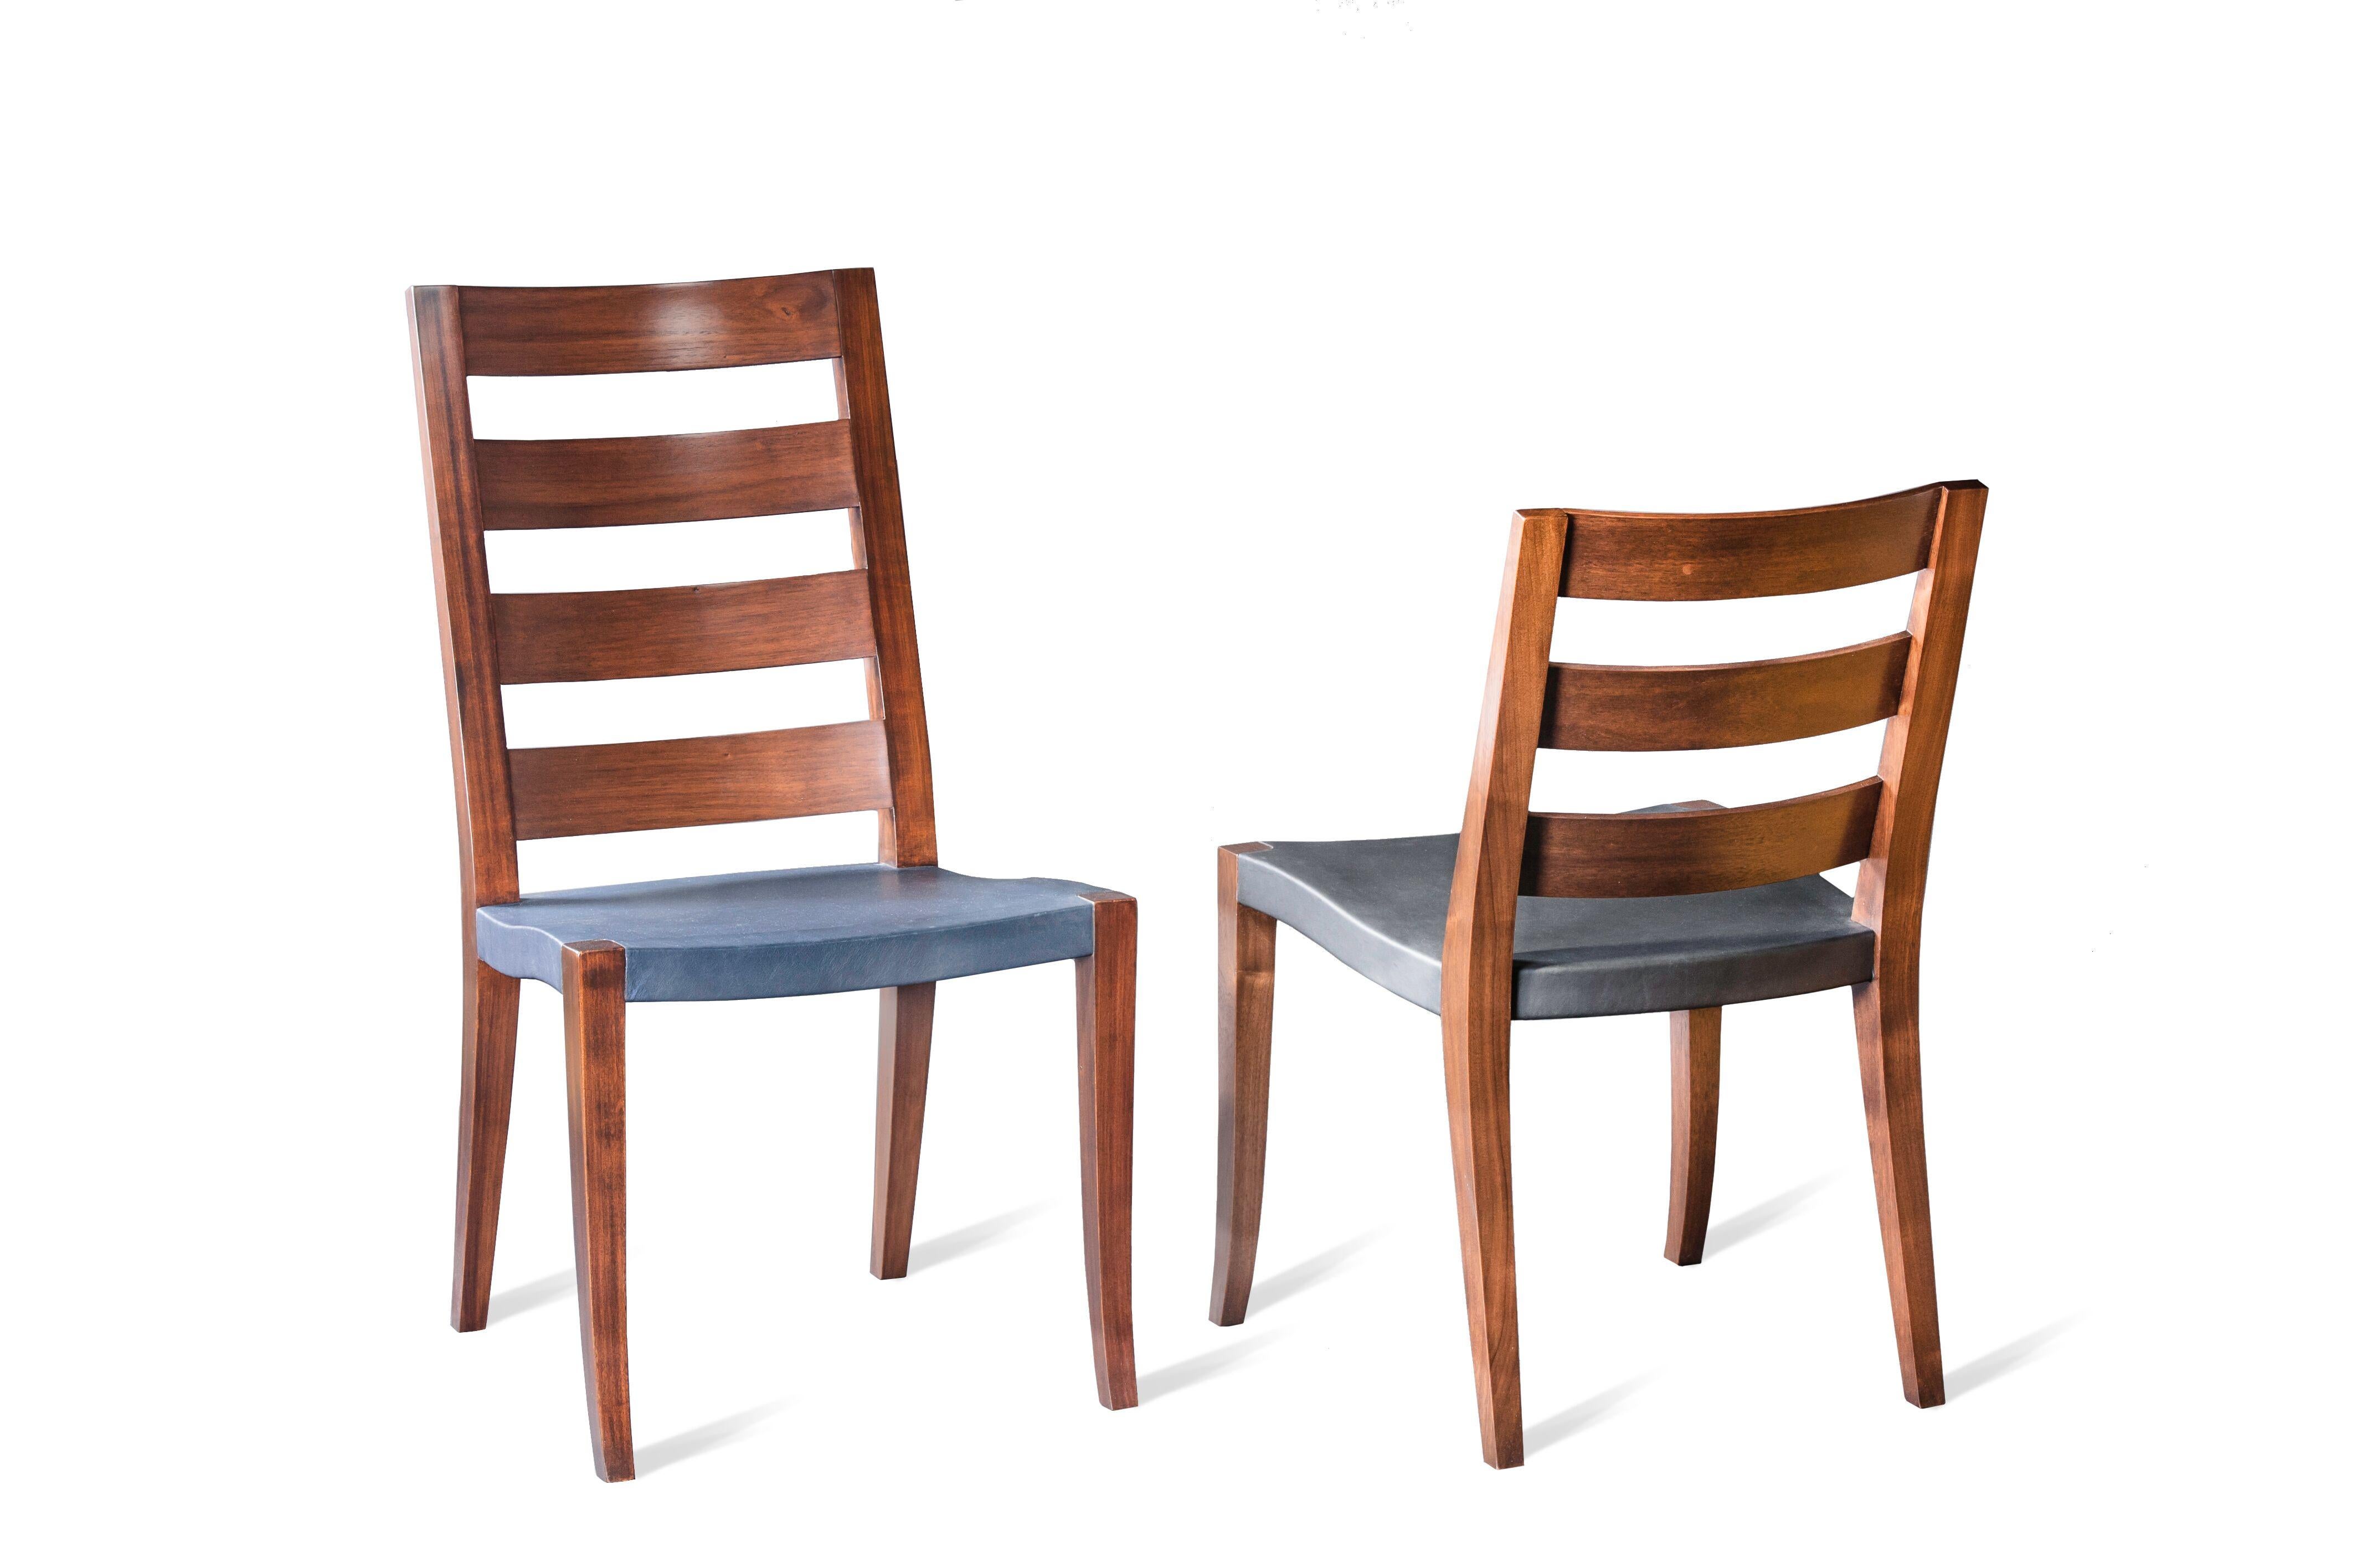 Walnut low and high slat back chairs with slung leather seat
Mortise and tenon construction. 
Comes in two heights 38.5